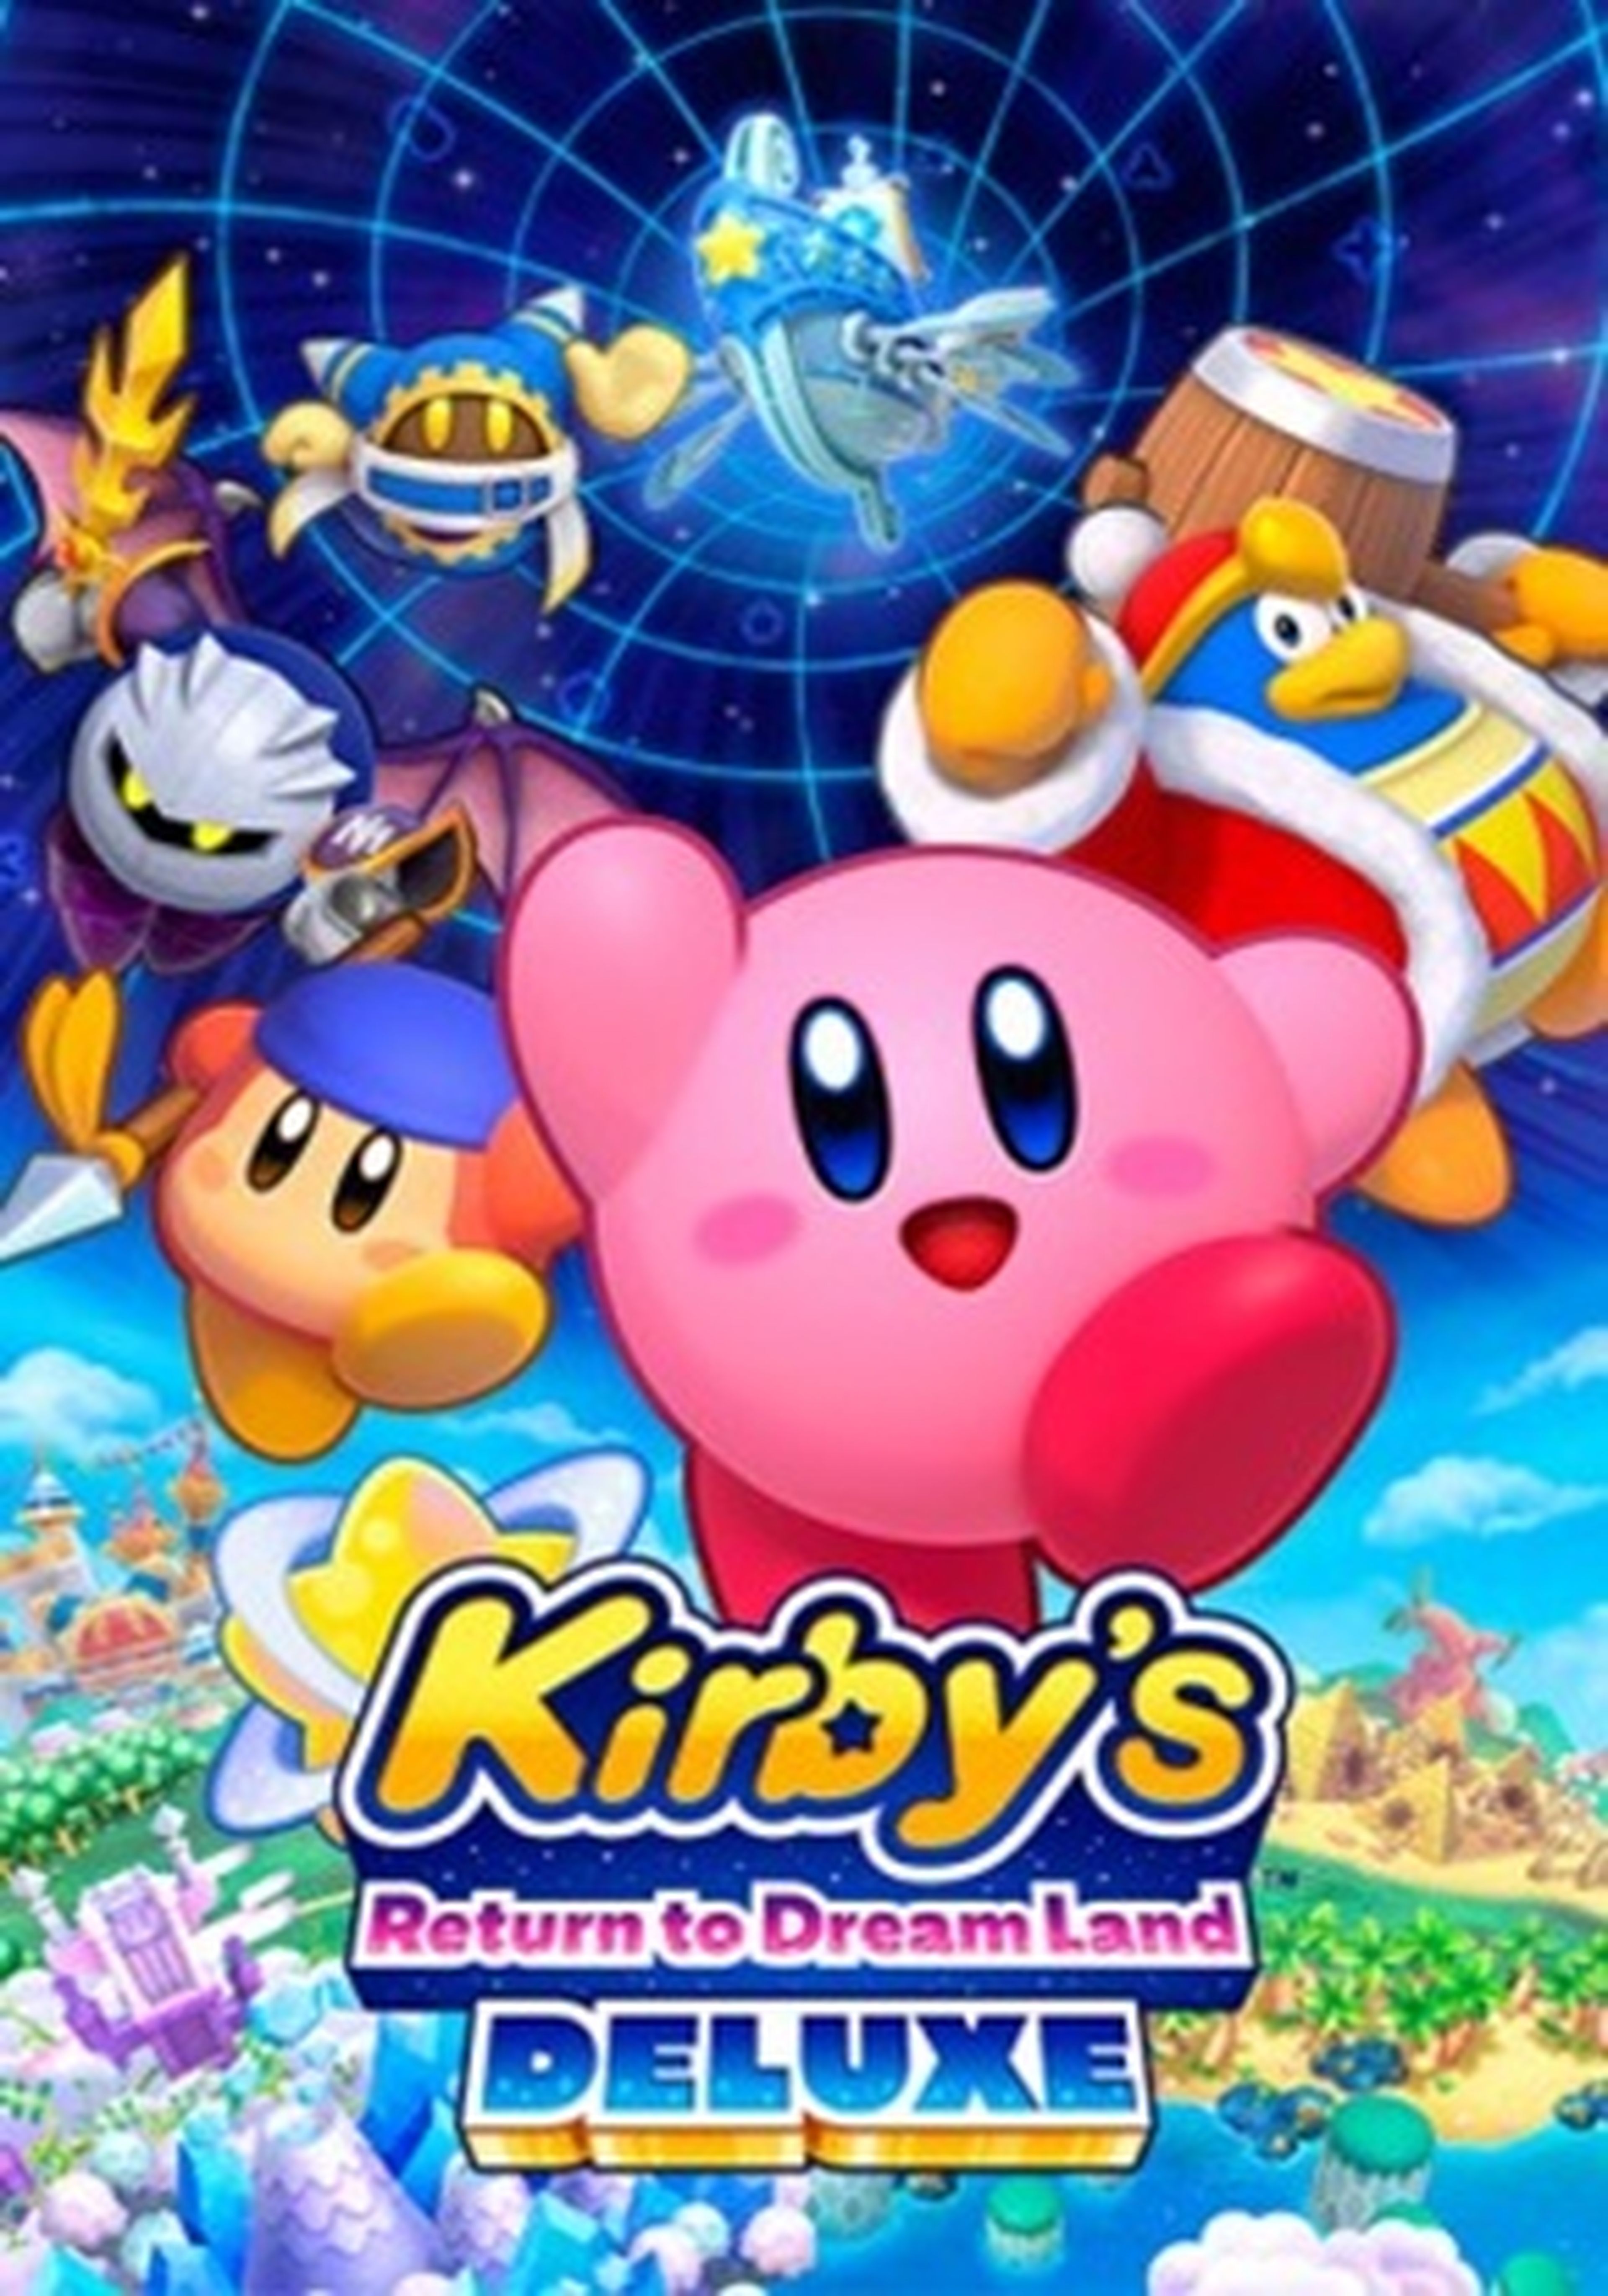 Kirby's Return to Dream Land Deluxe cartel